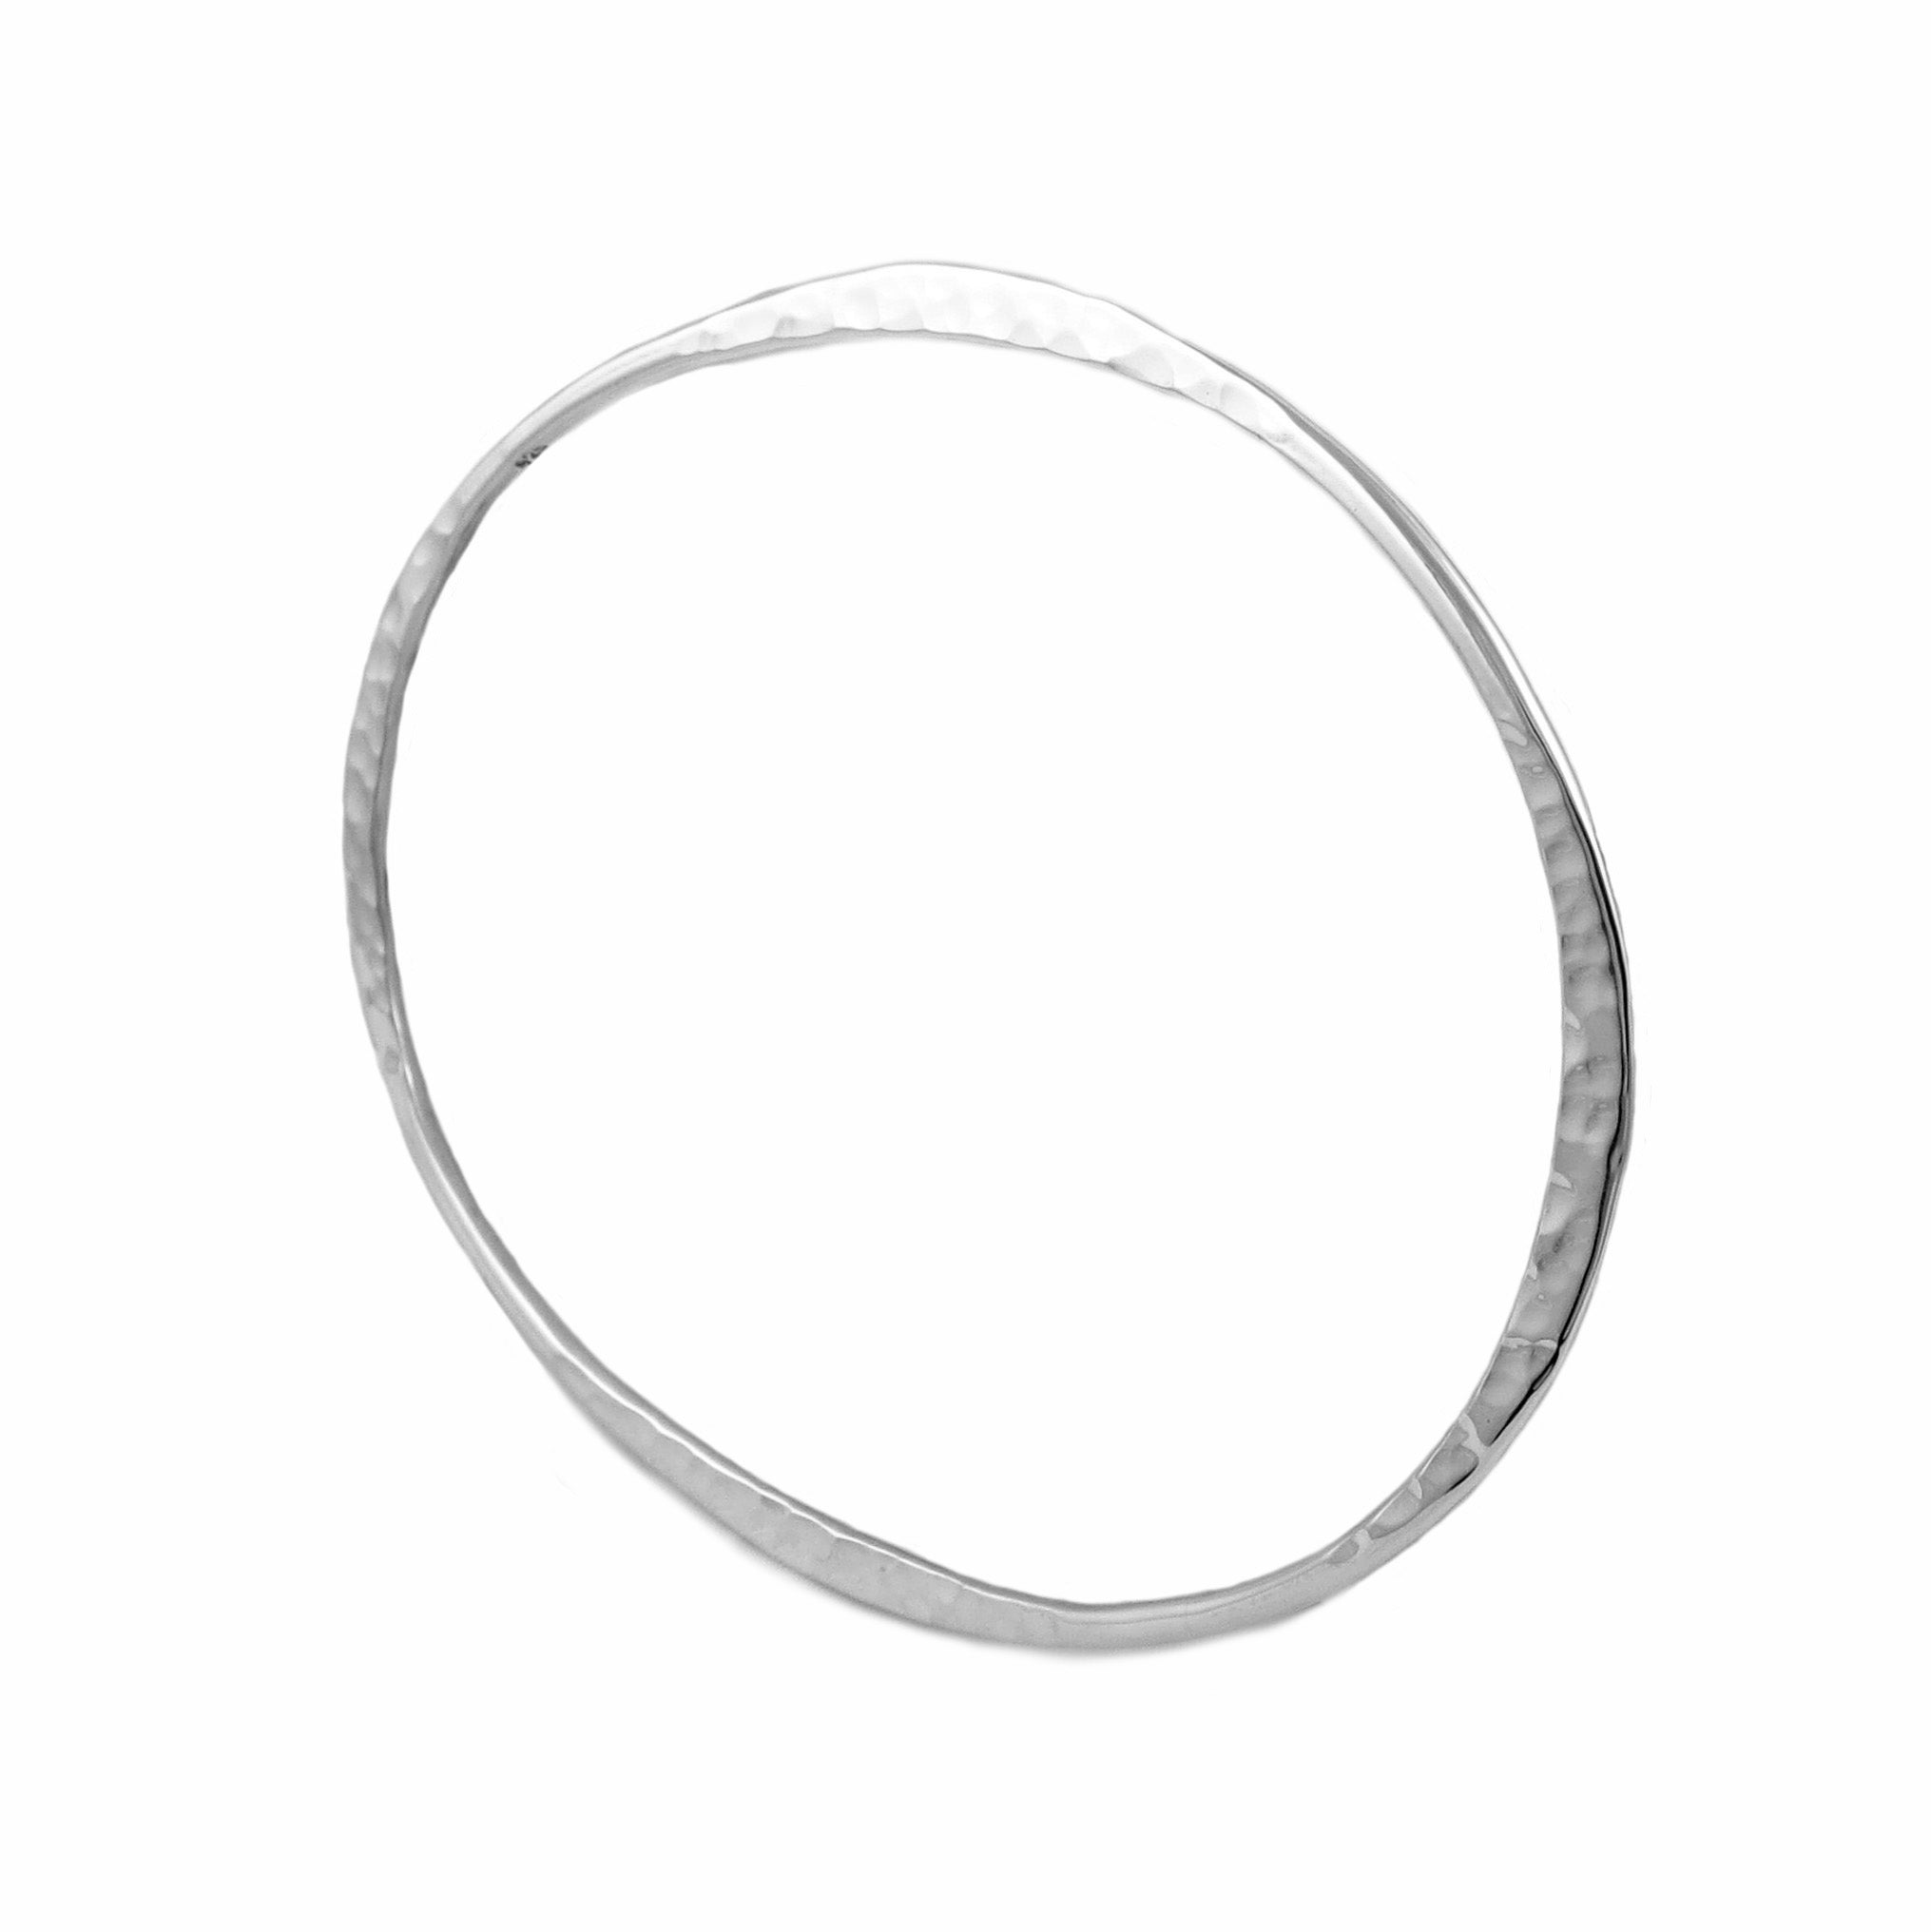 Handmade Solid Oval 925 Sterling Silver Bangle – The Mexican